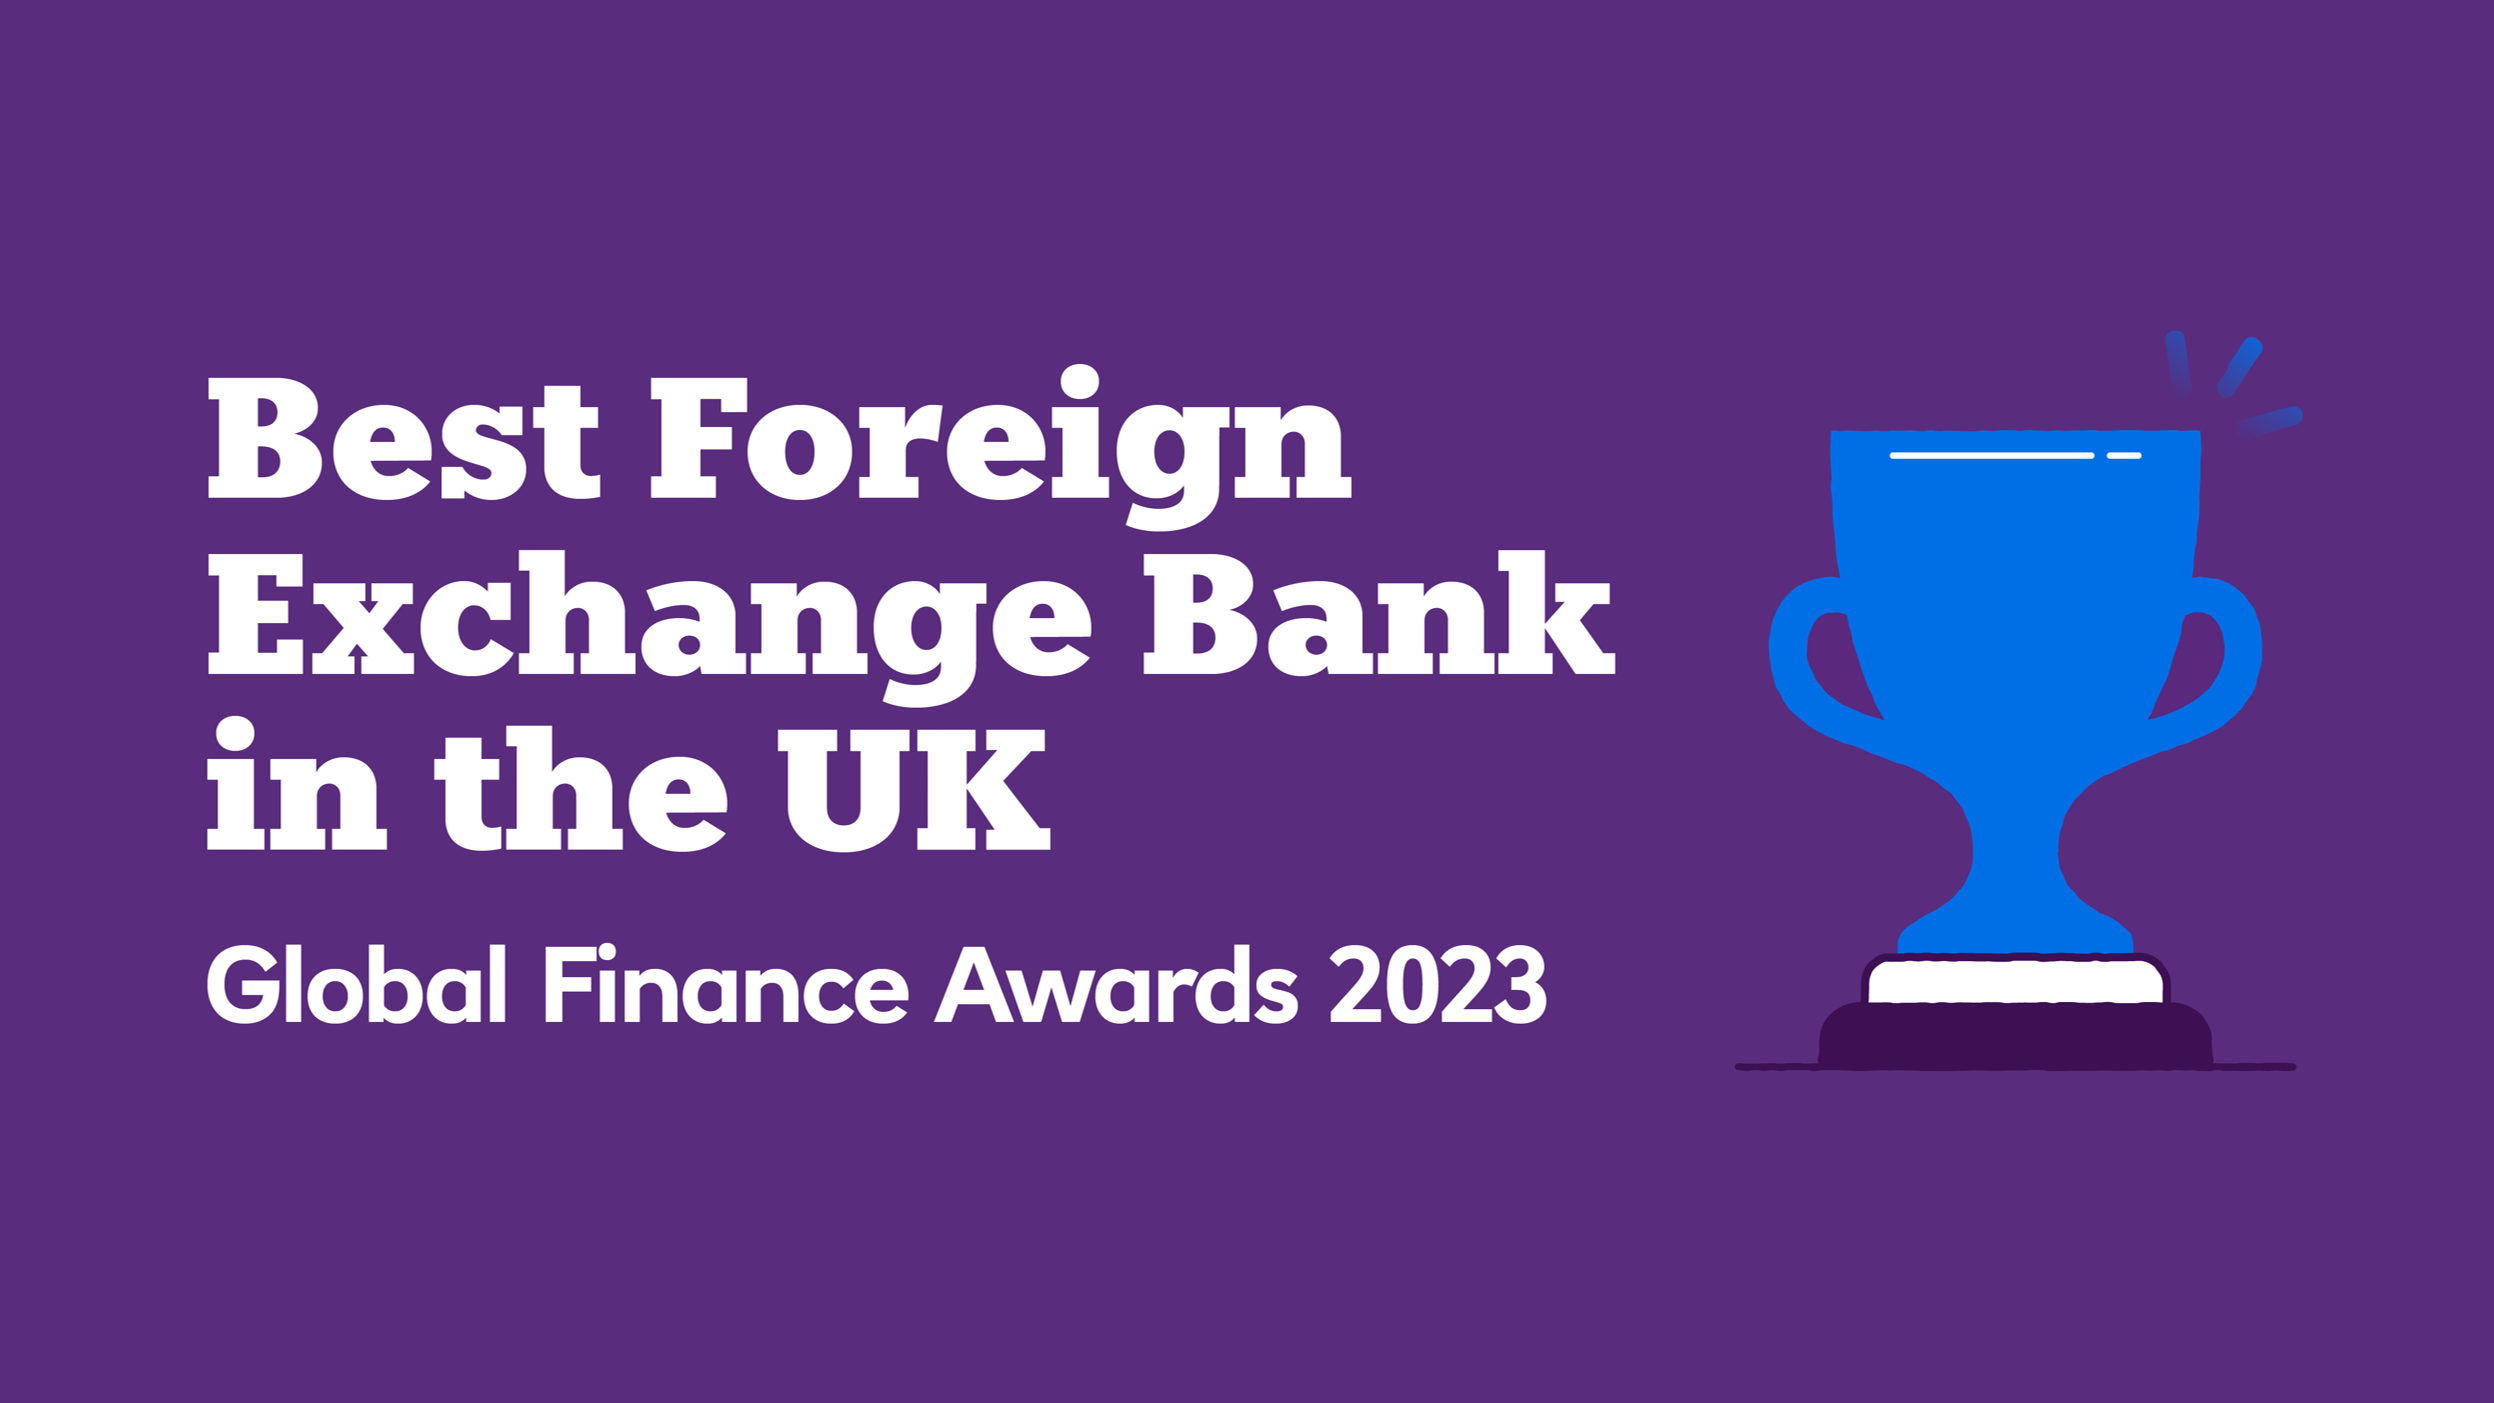 NatWest Markets announced by Global Finance as the Best Foreign Exchange Bank in the UK